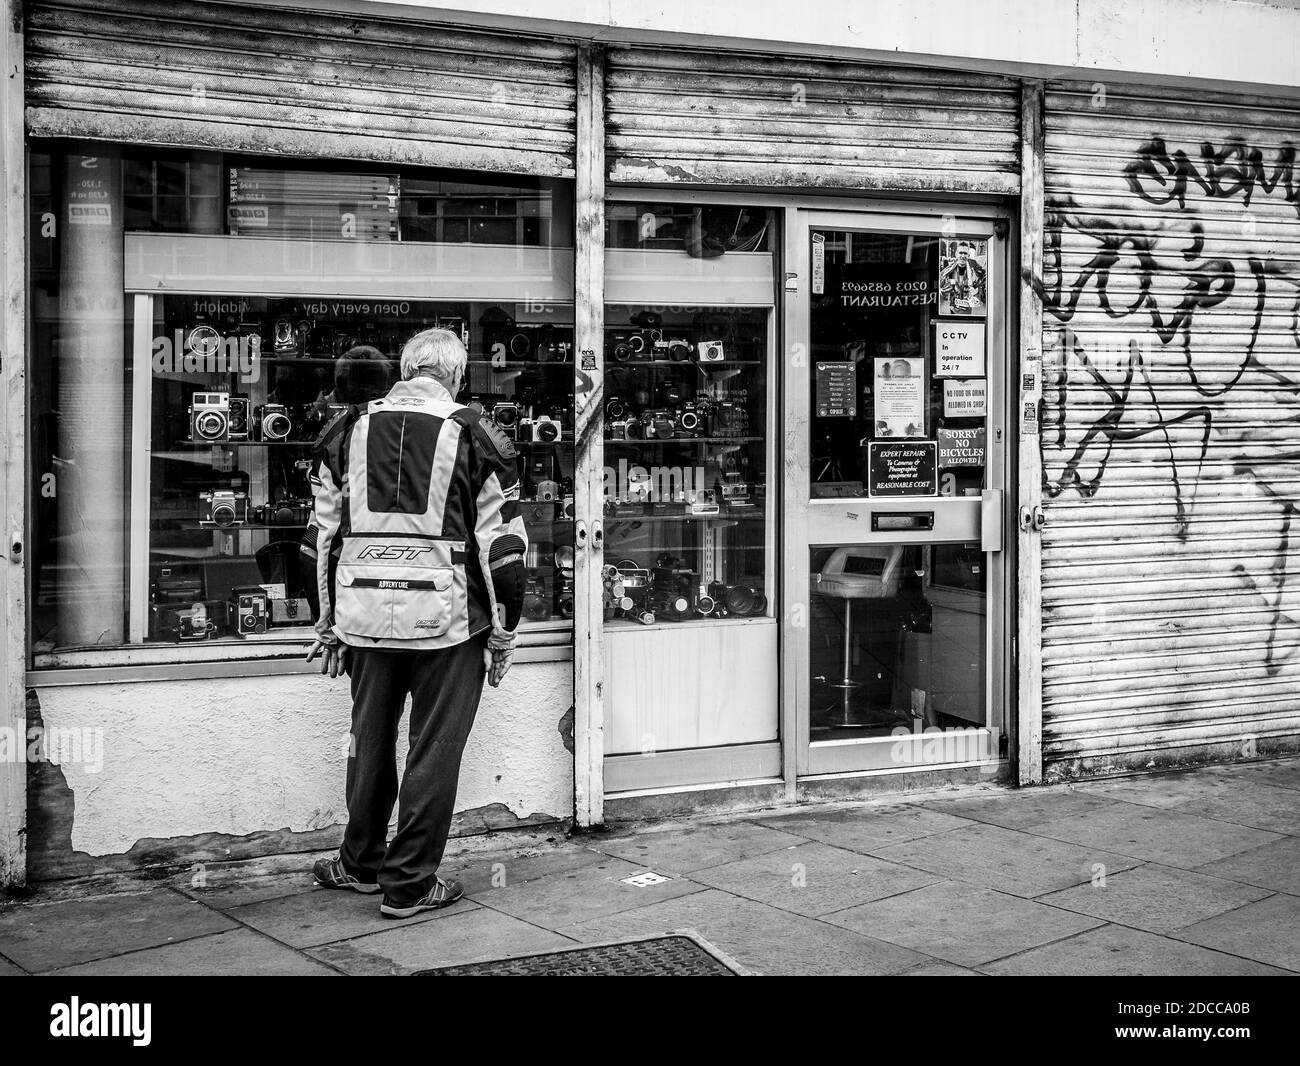 Man window shopping for cameras in Camden Town London with partially shut steel shutters with graffiti on them in a black and white tone, 15 Aug 2020 Stock Photo